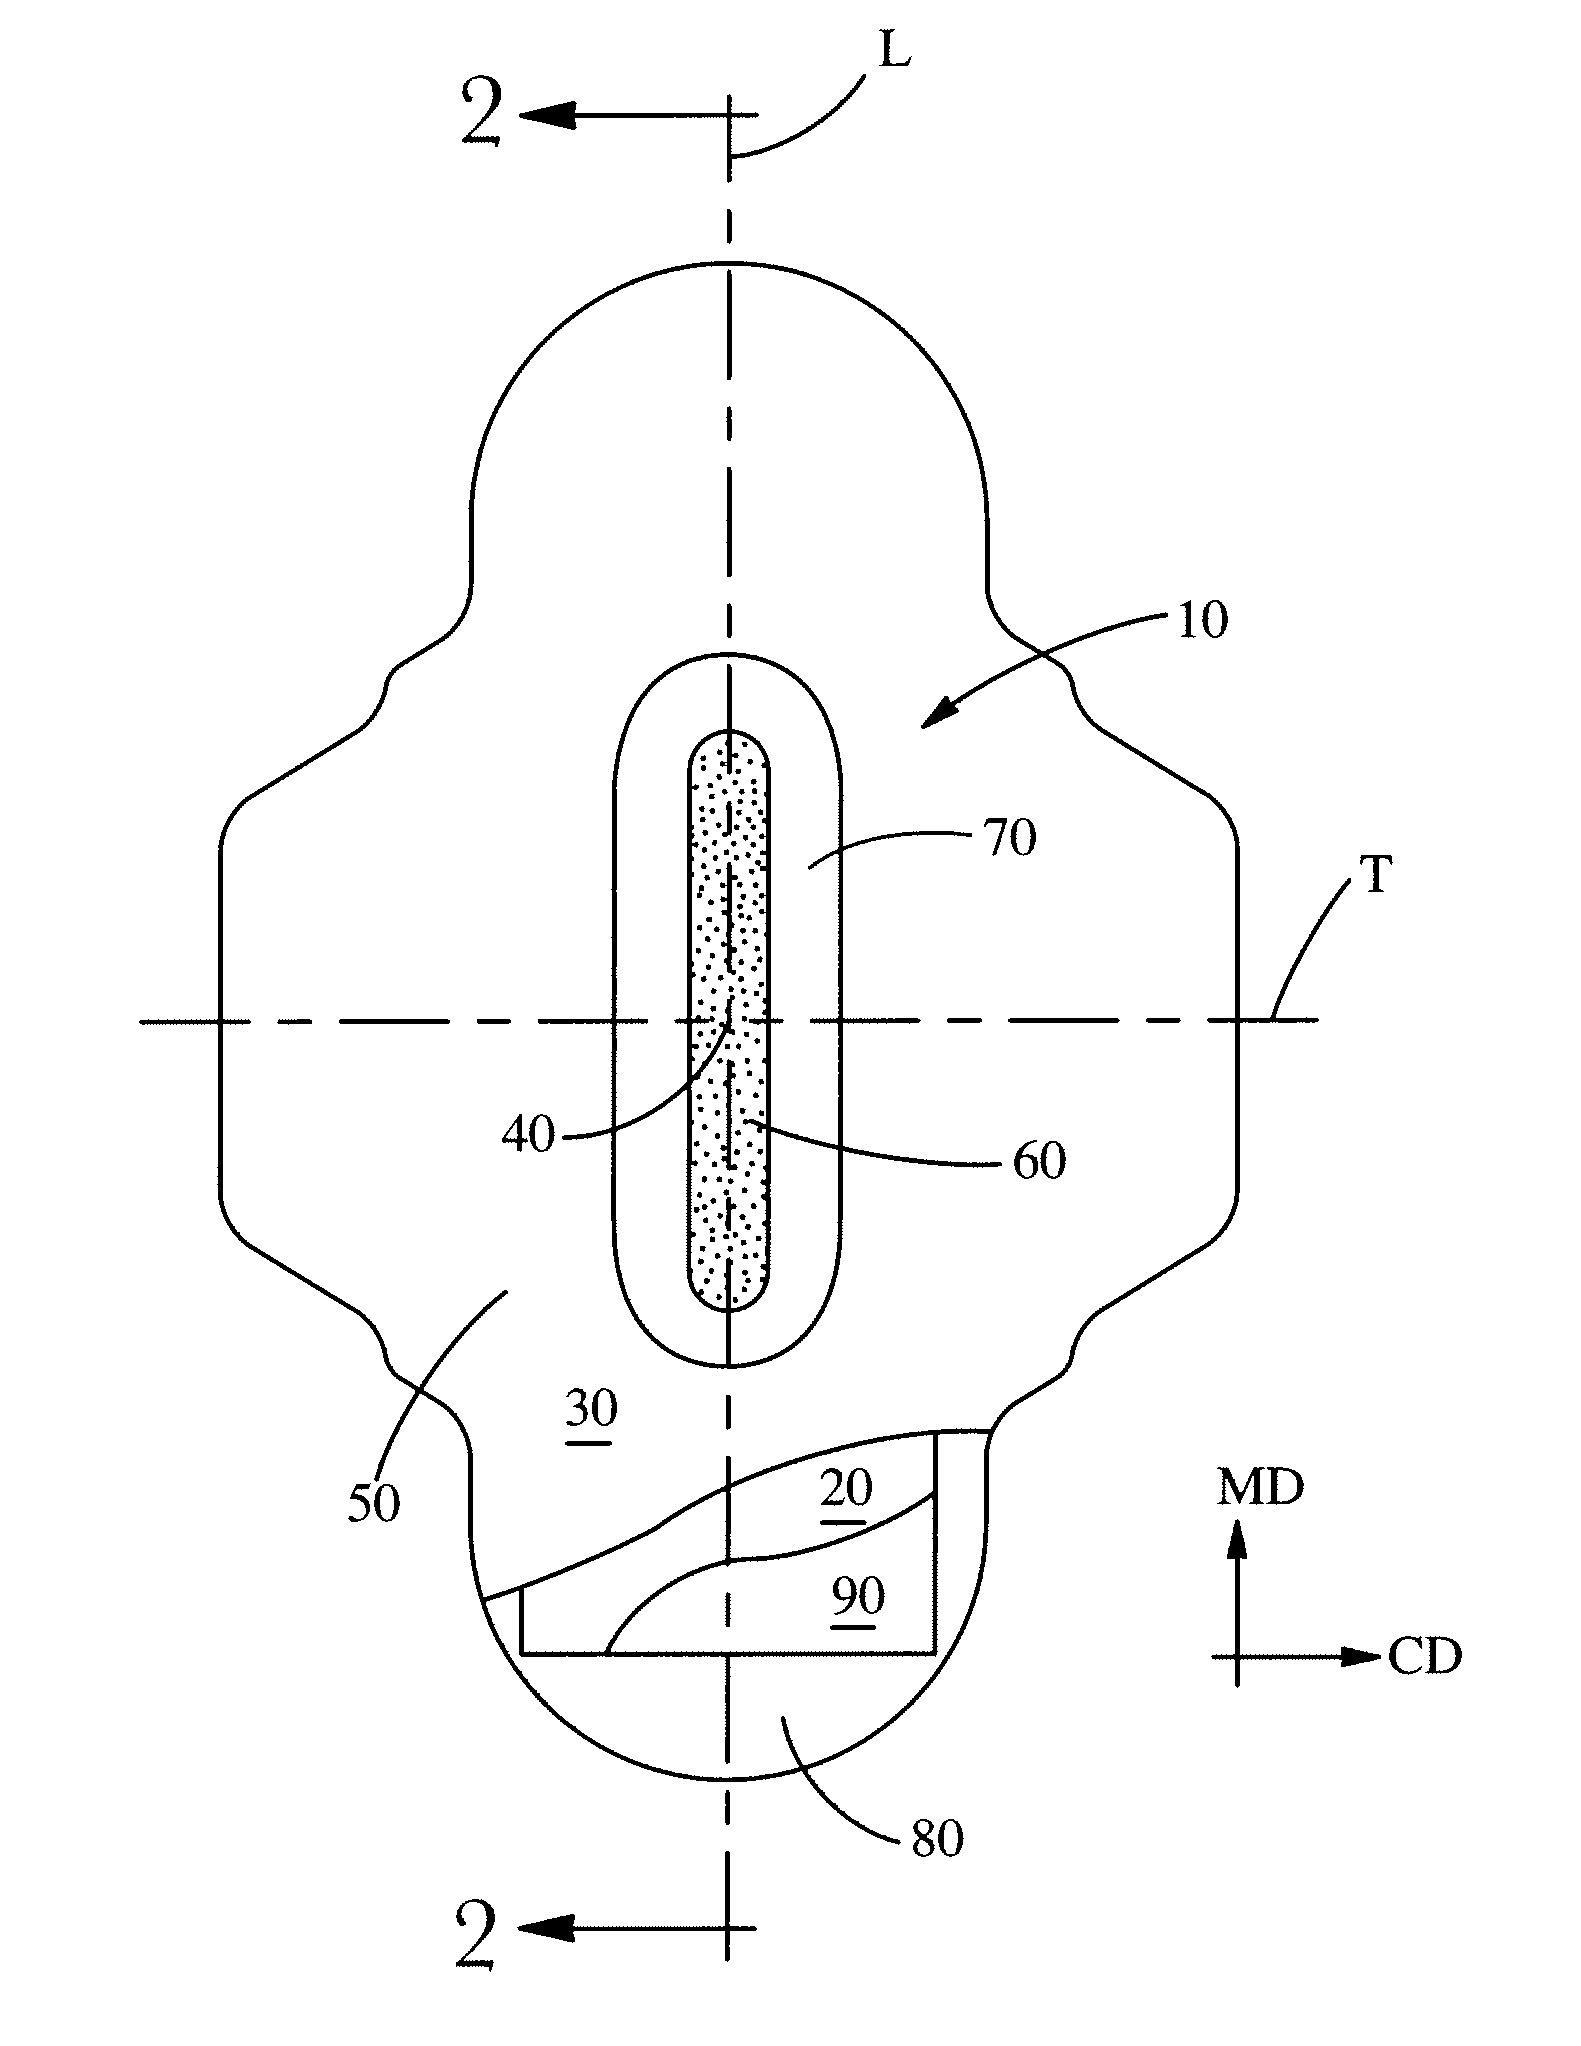 Method of producing color change in overlapping layers